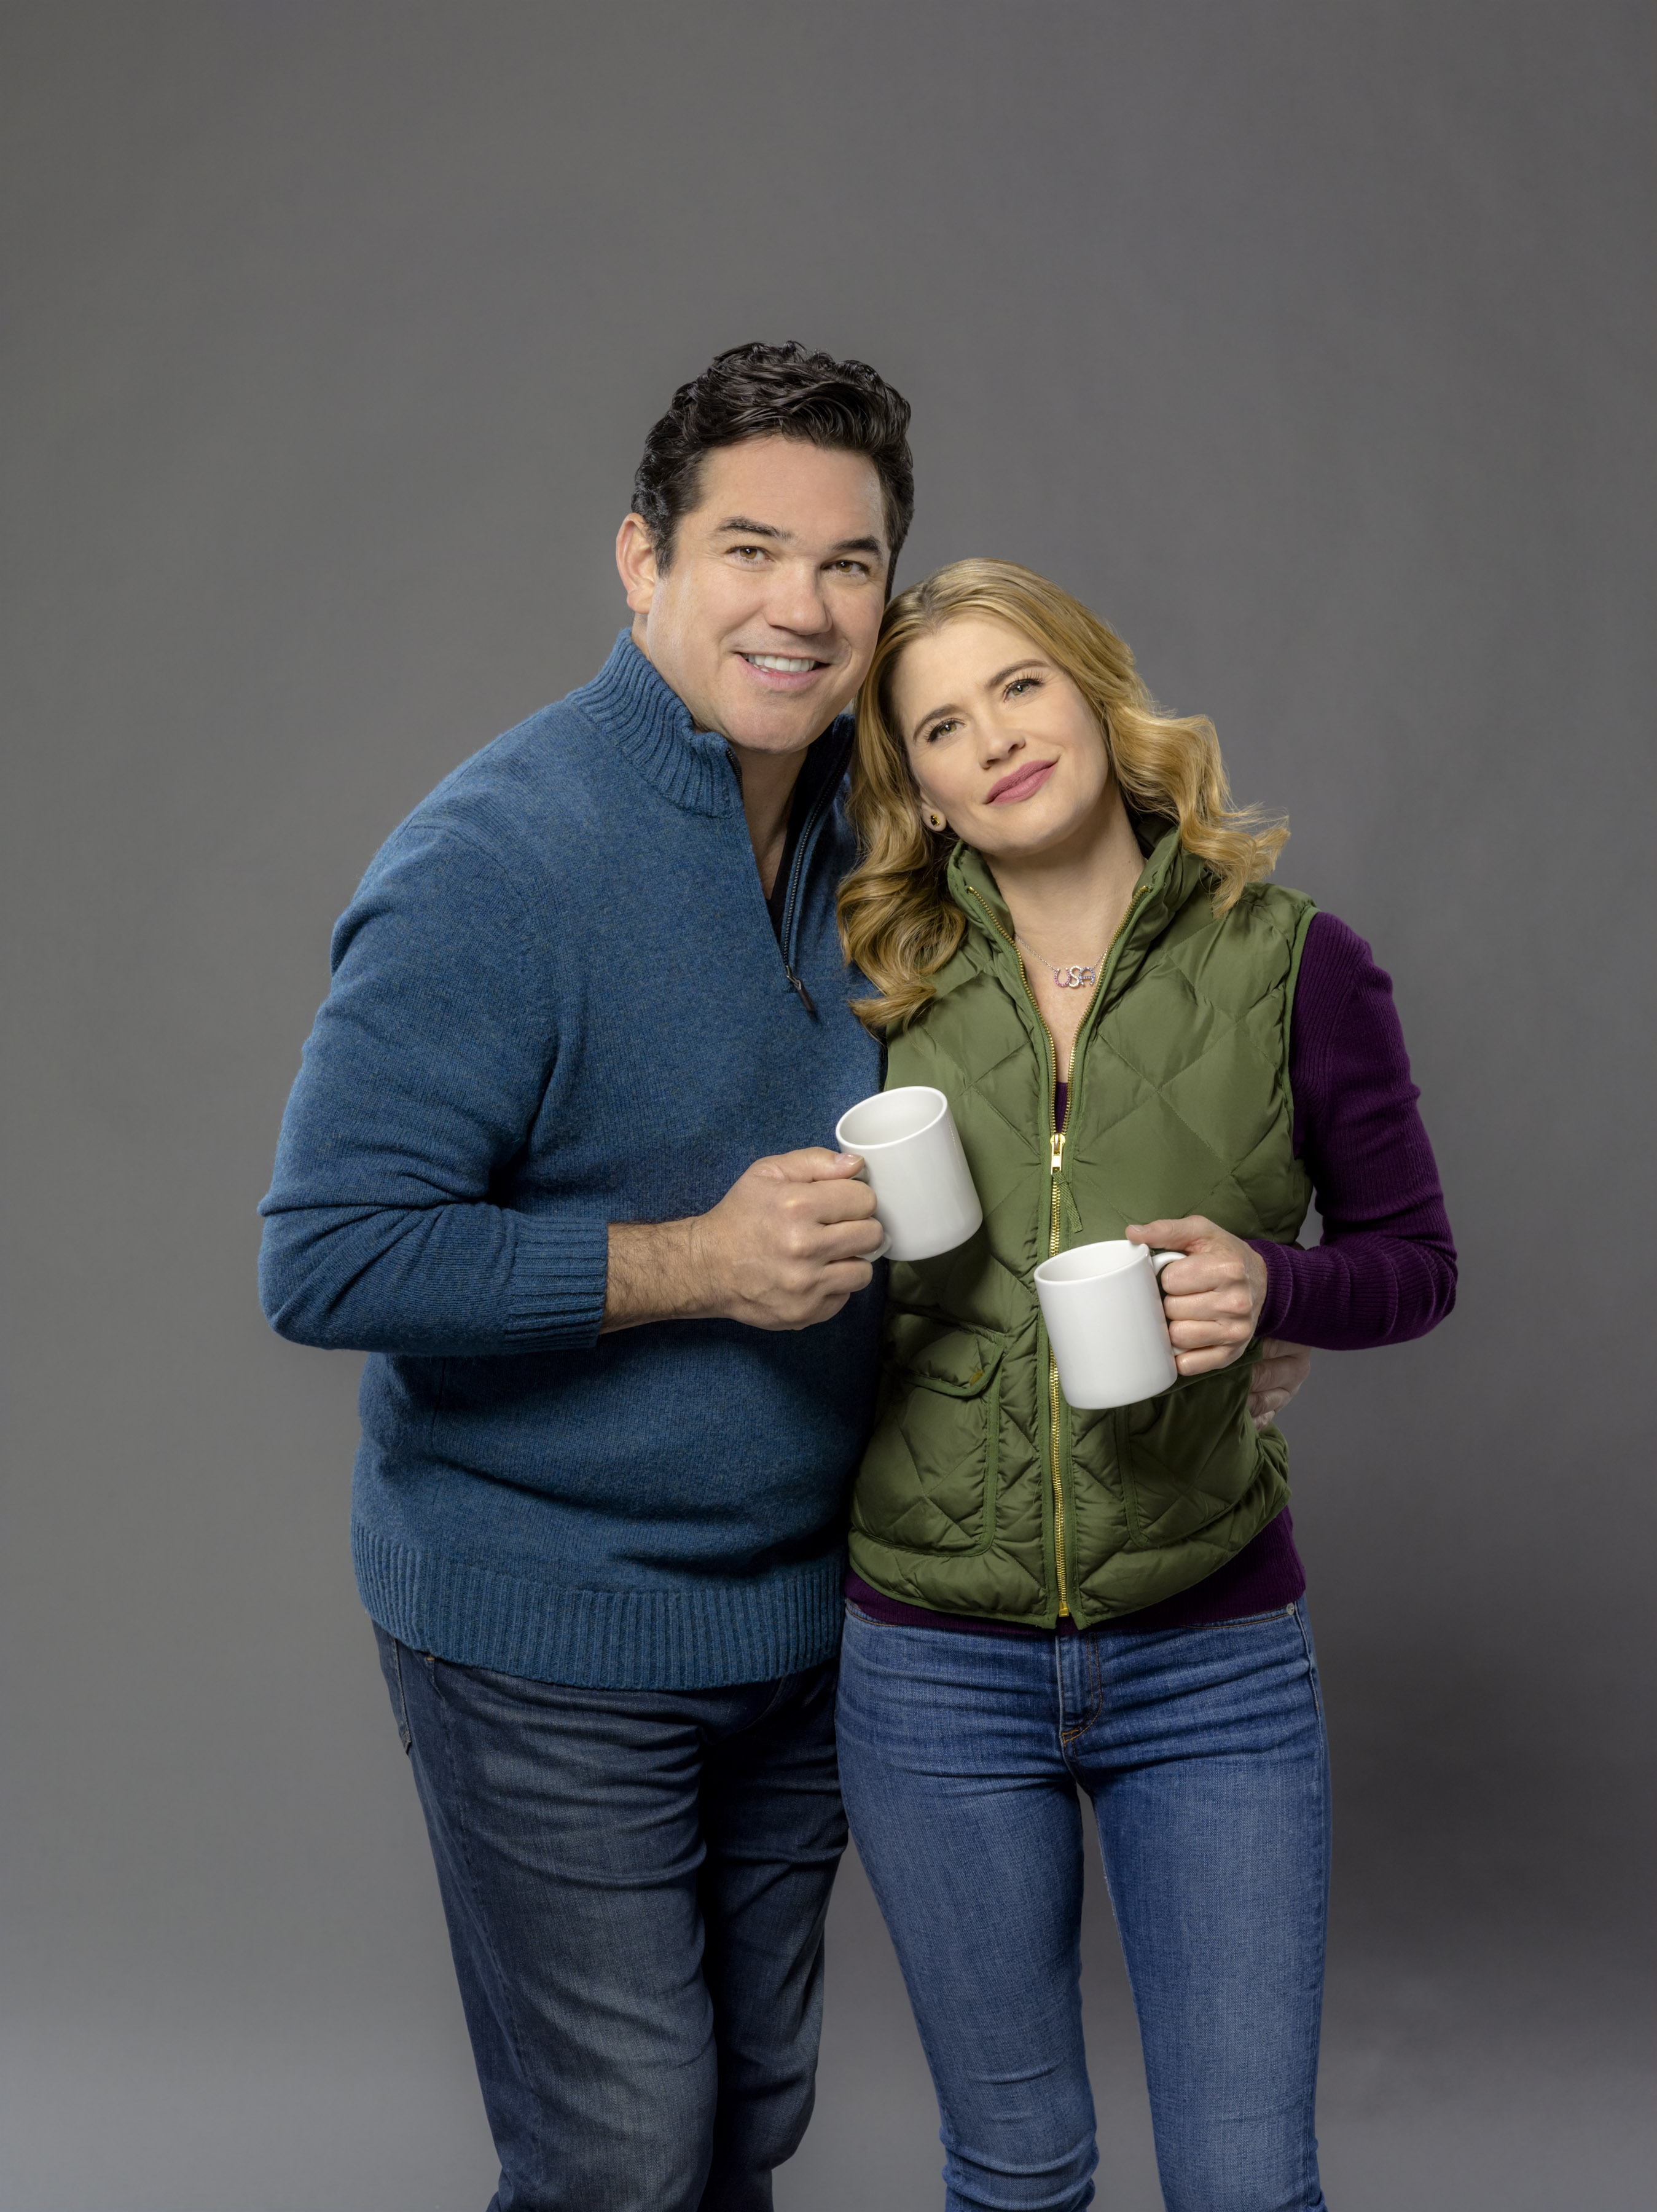 Dean Cain, Kristy Swanson Credit: Copyright 2017 Crown Media United States ...